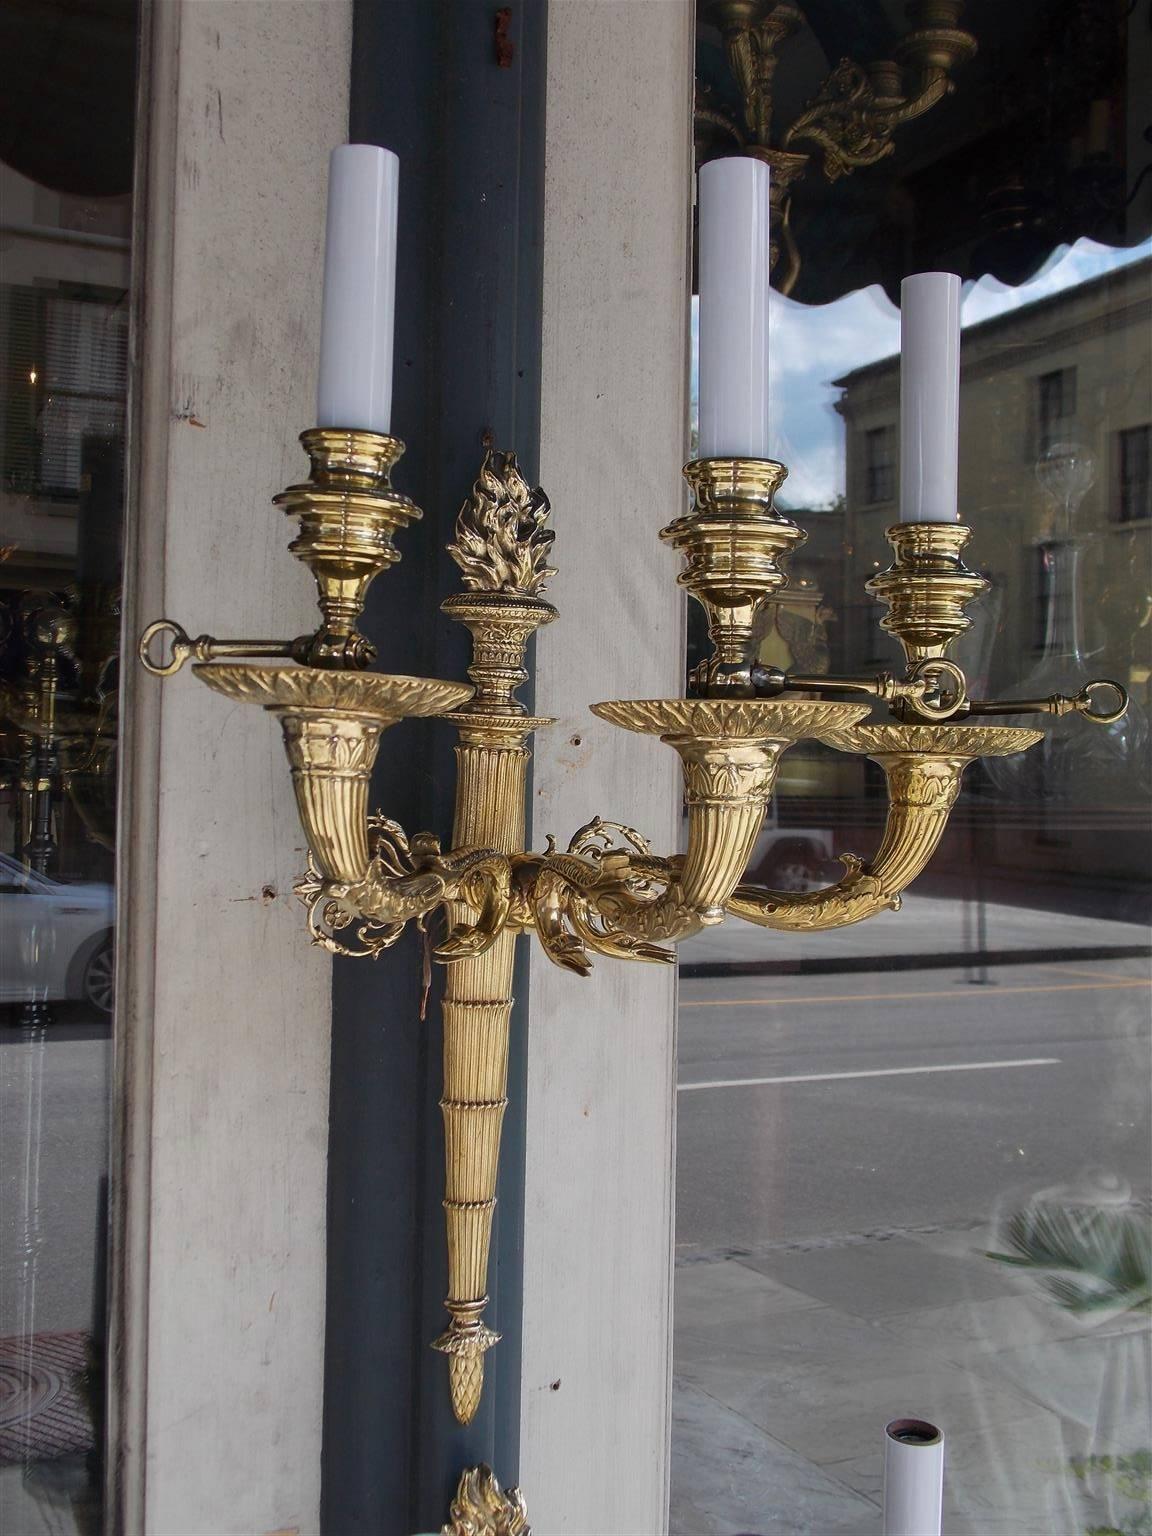 Cast Pair of French Brass Flame Finial and Swan Motif Wall Sconces, Circa 1840